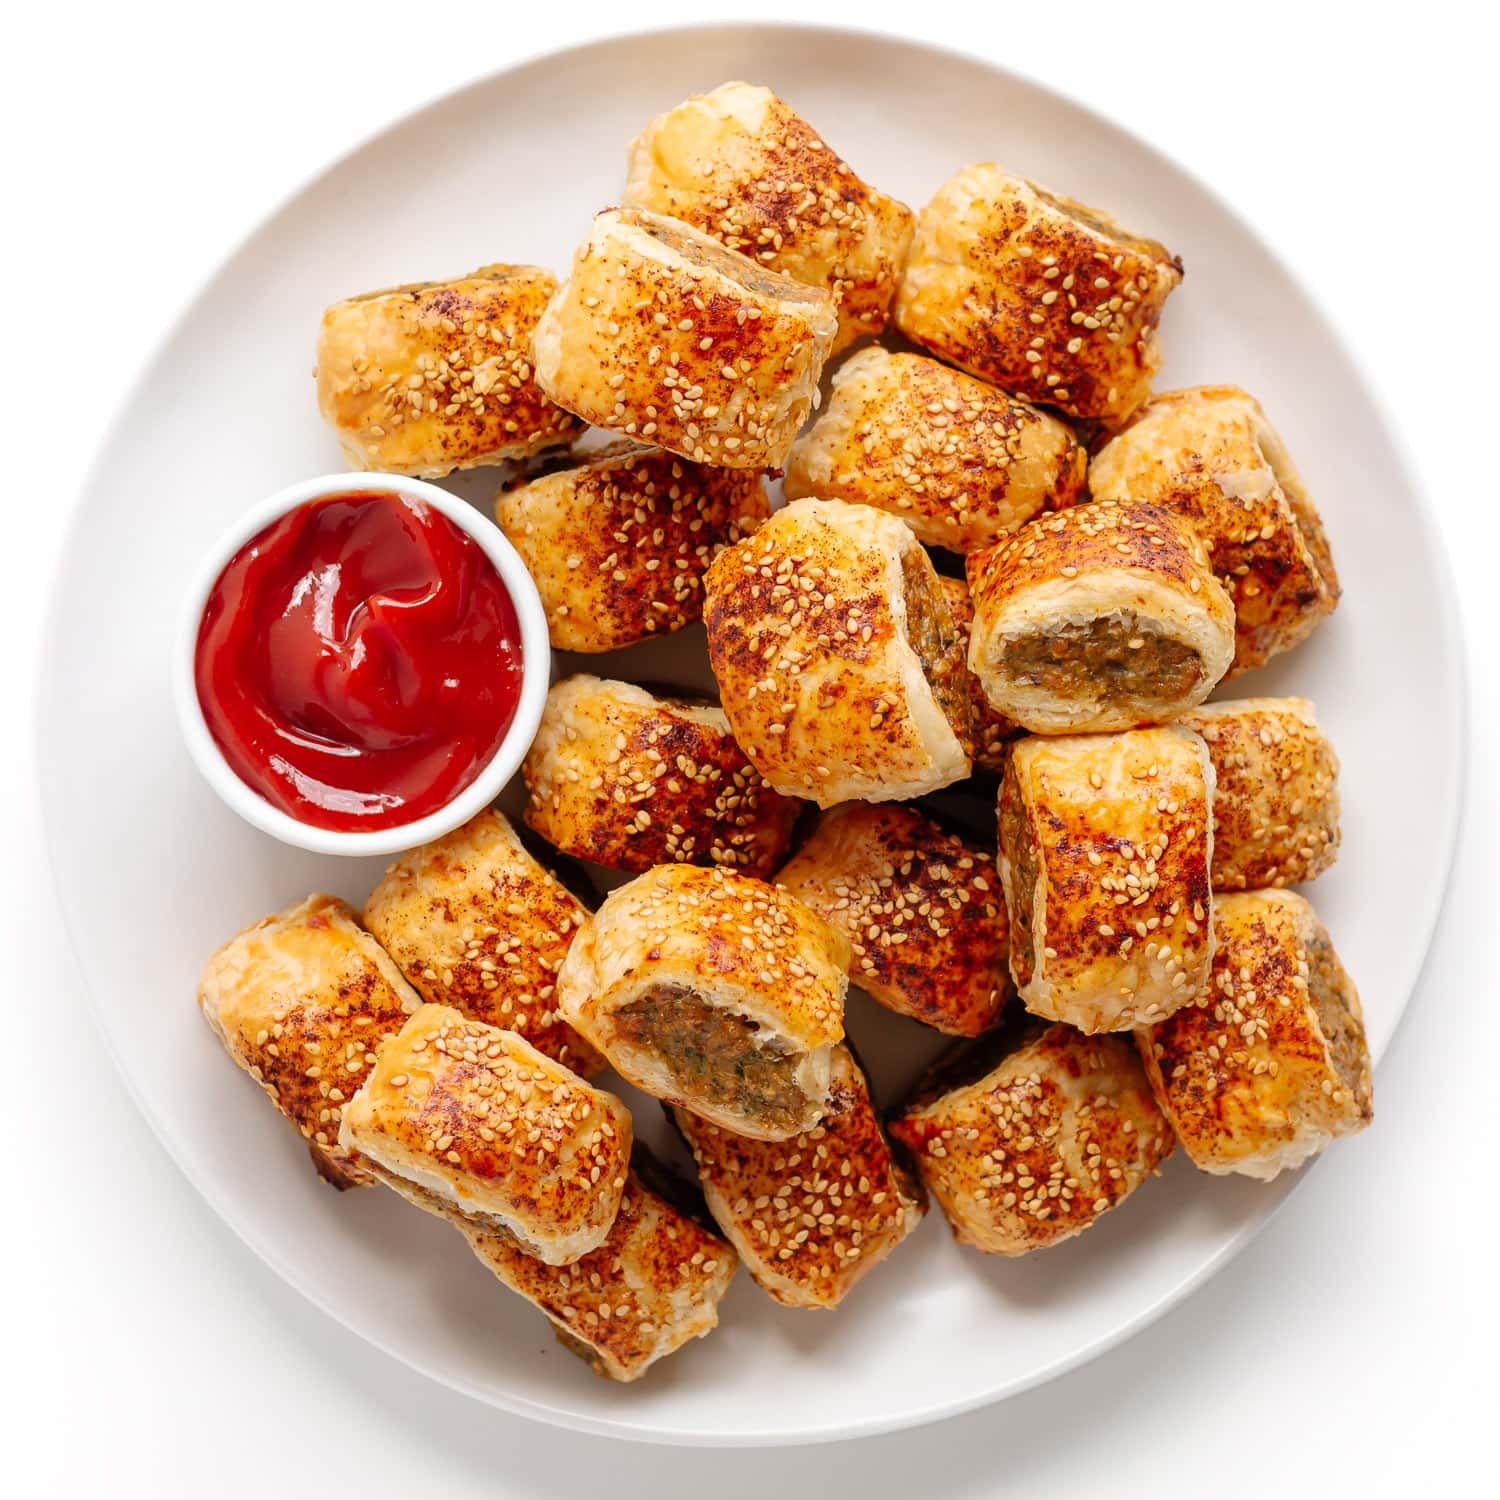 Homemade chicken sausage rolls piled on a large white plate with small bowl of ketchup.